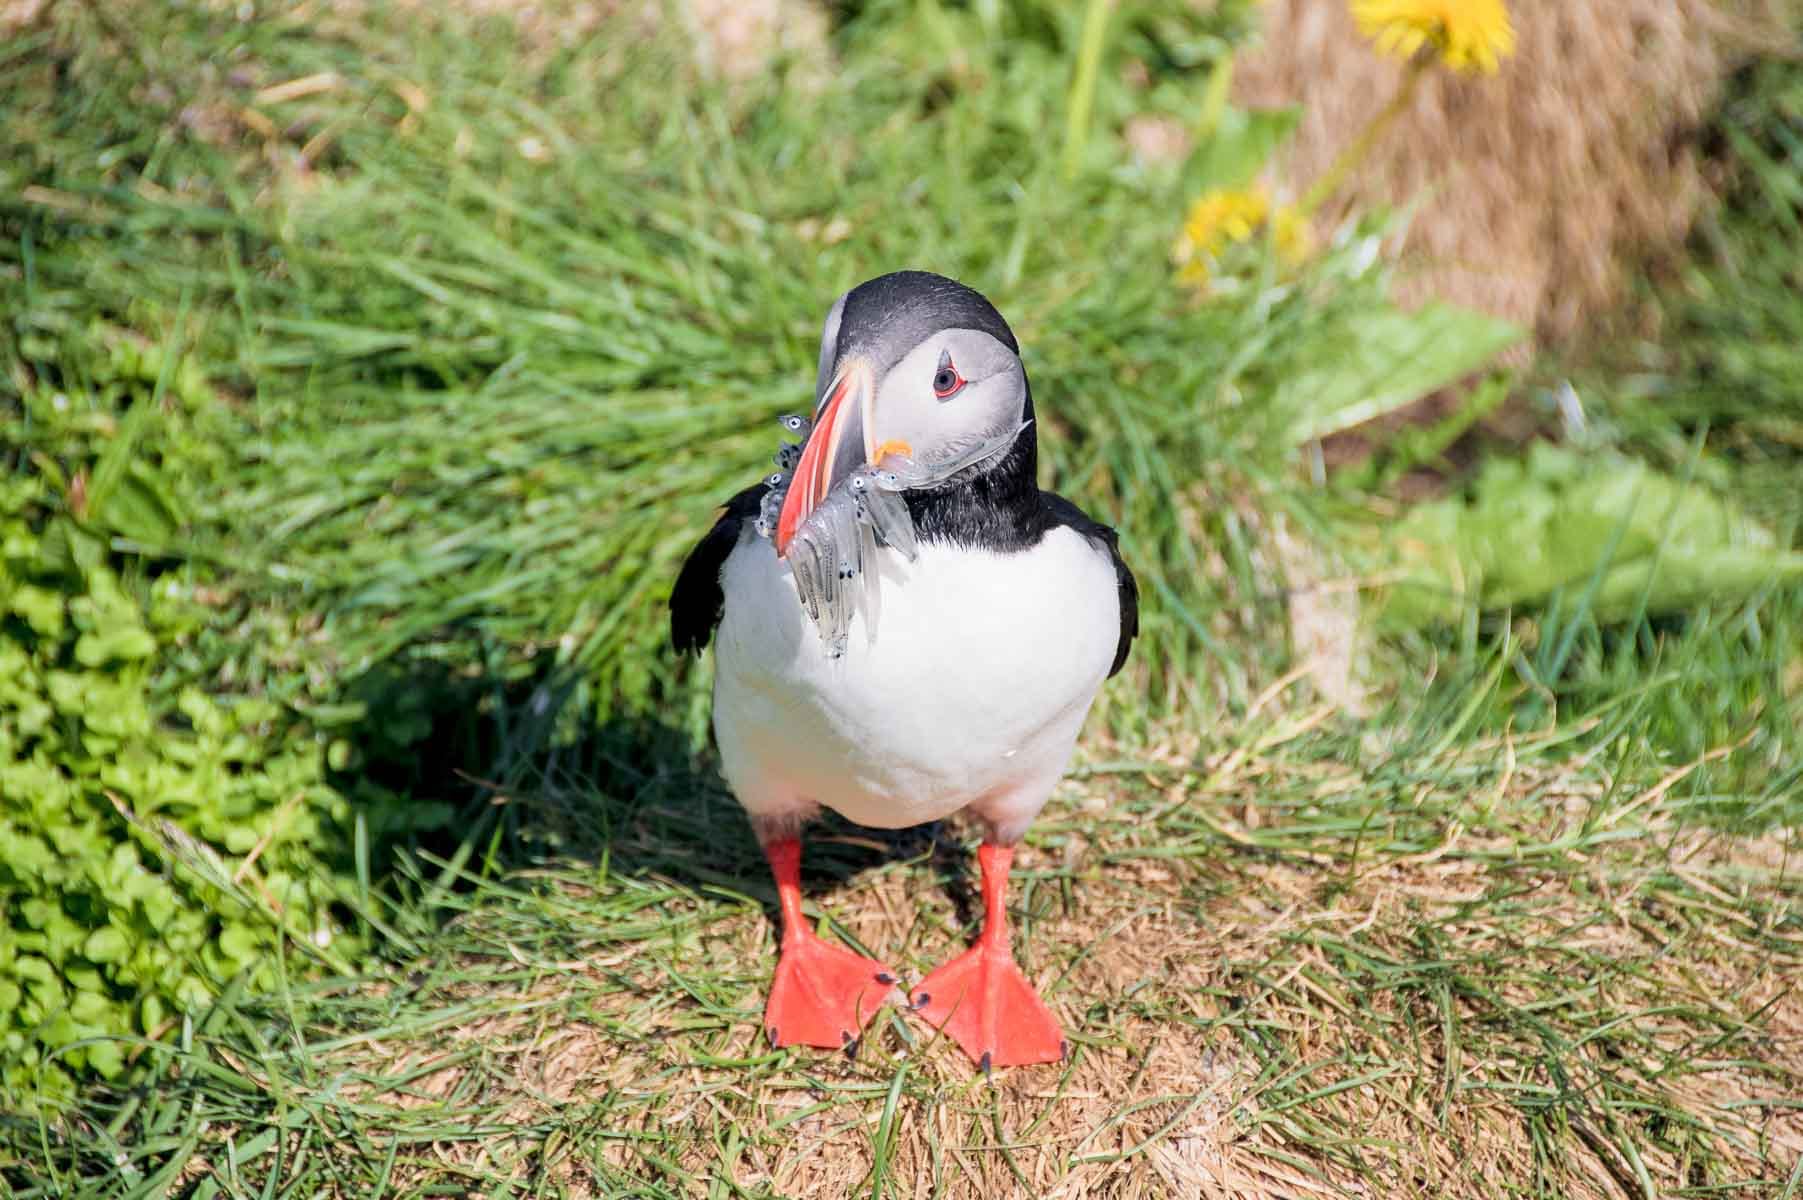 Puffins are beloved birds in Iceland summertime